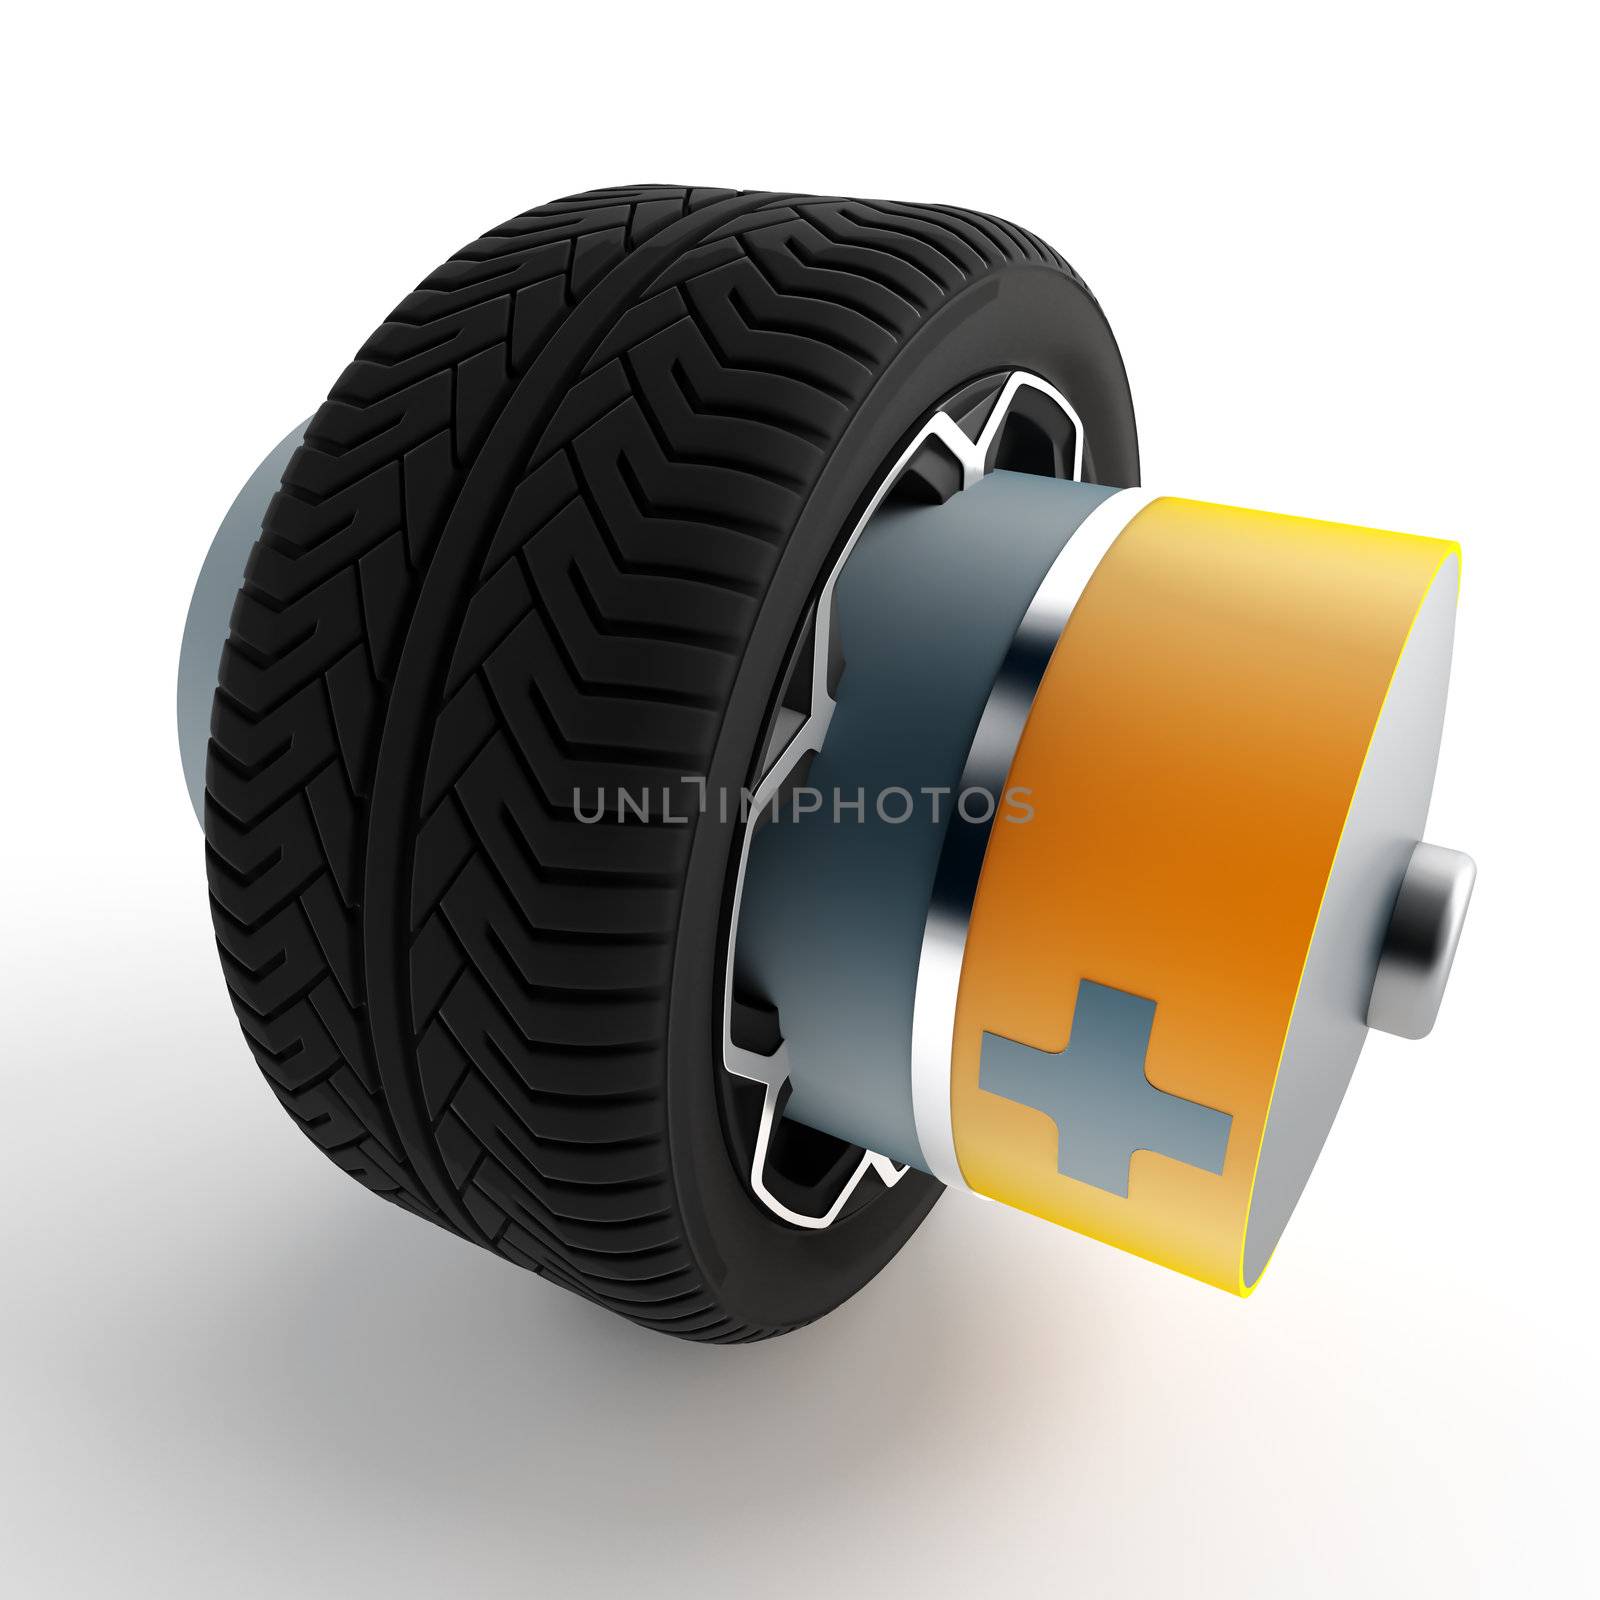 wheel of a car with an attached battery on a white background by Serp